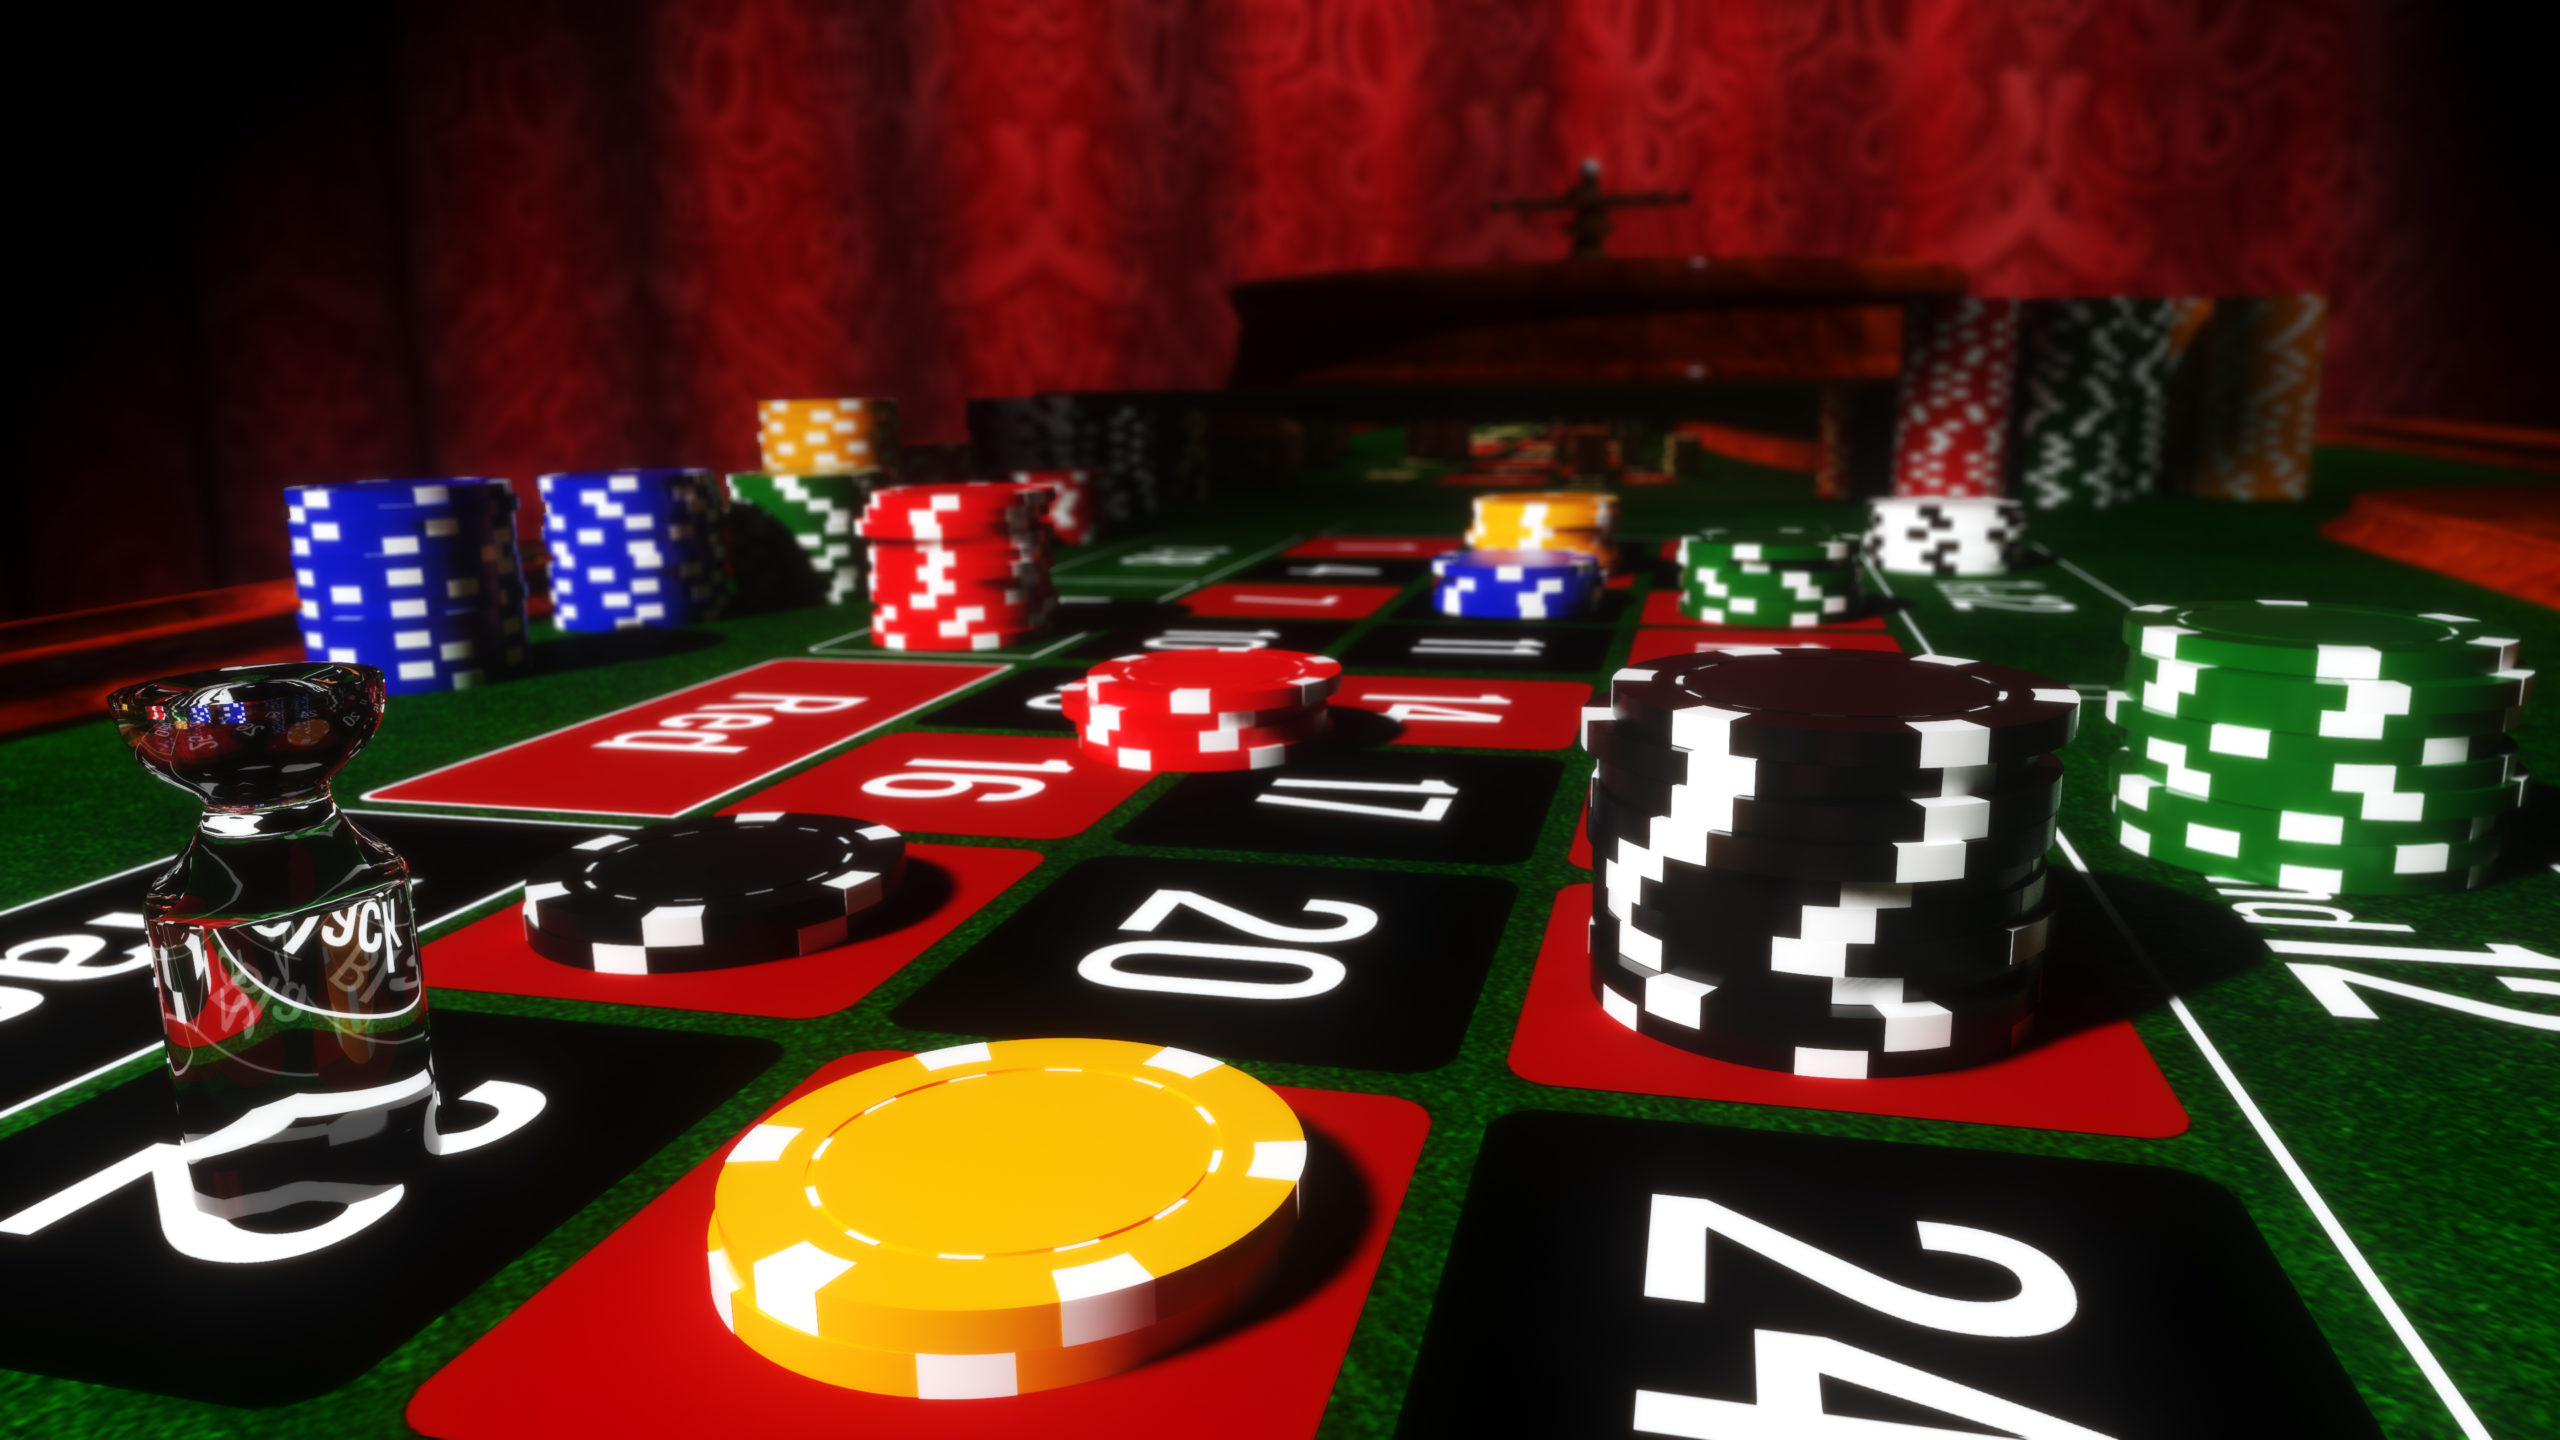 Play with casino